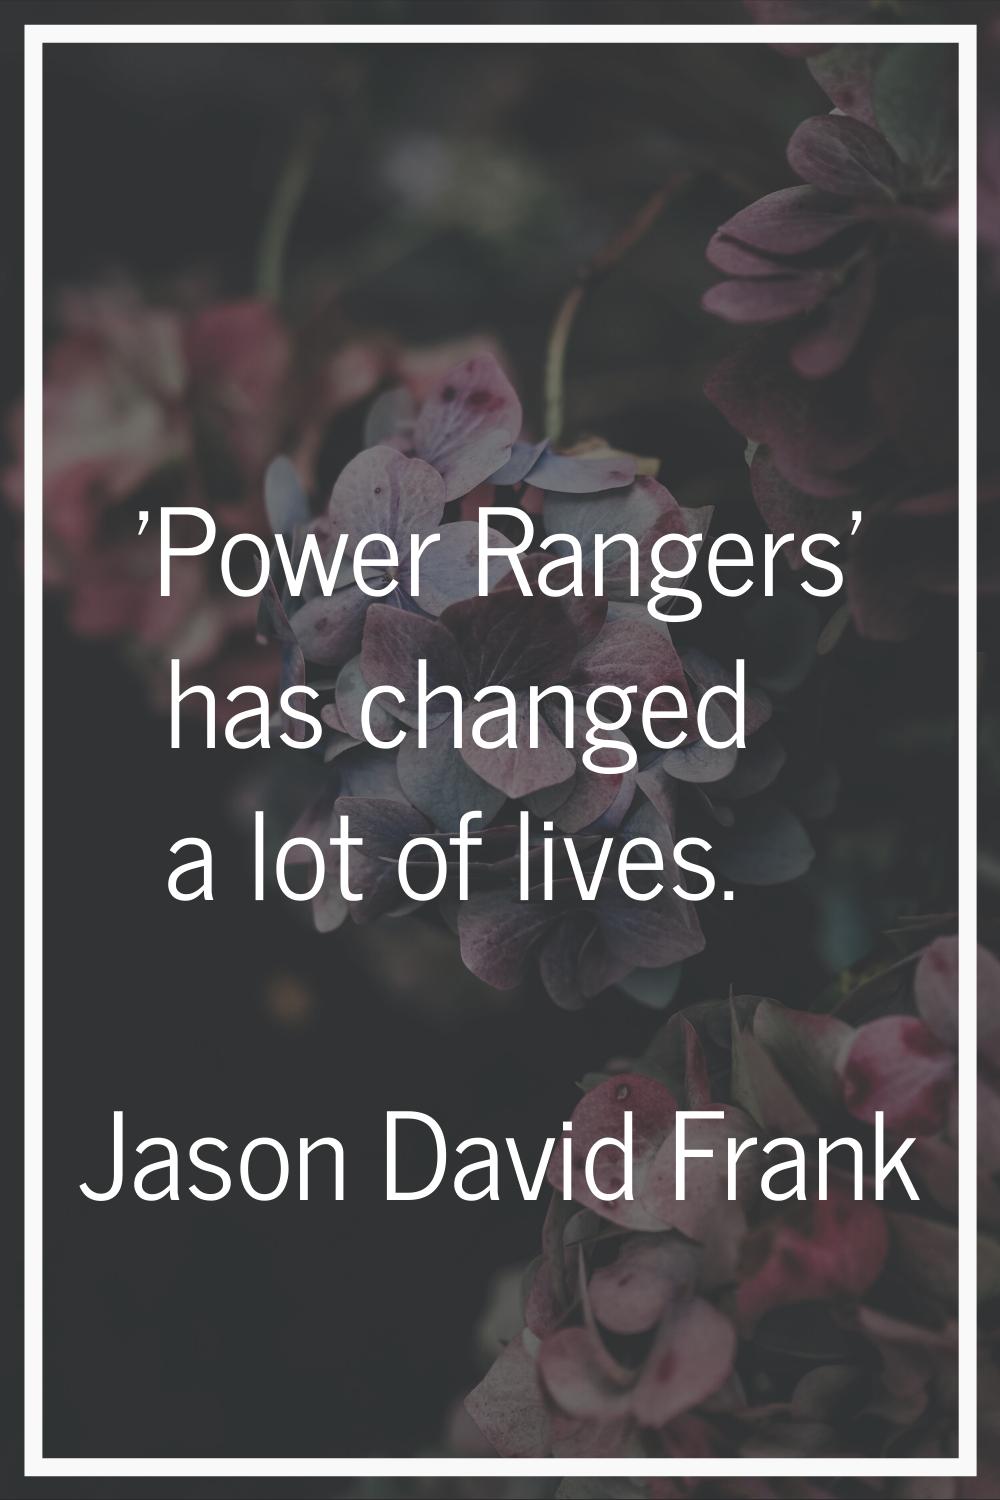 'Power Rangers' has changed a lot of lives.